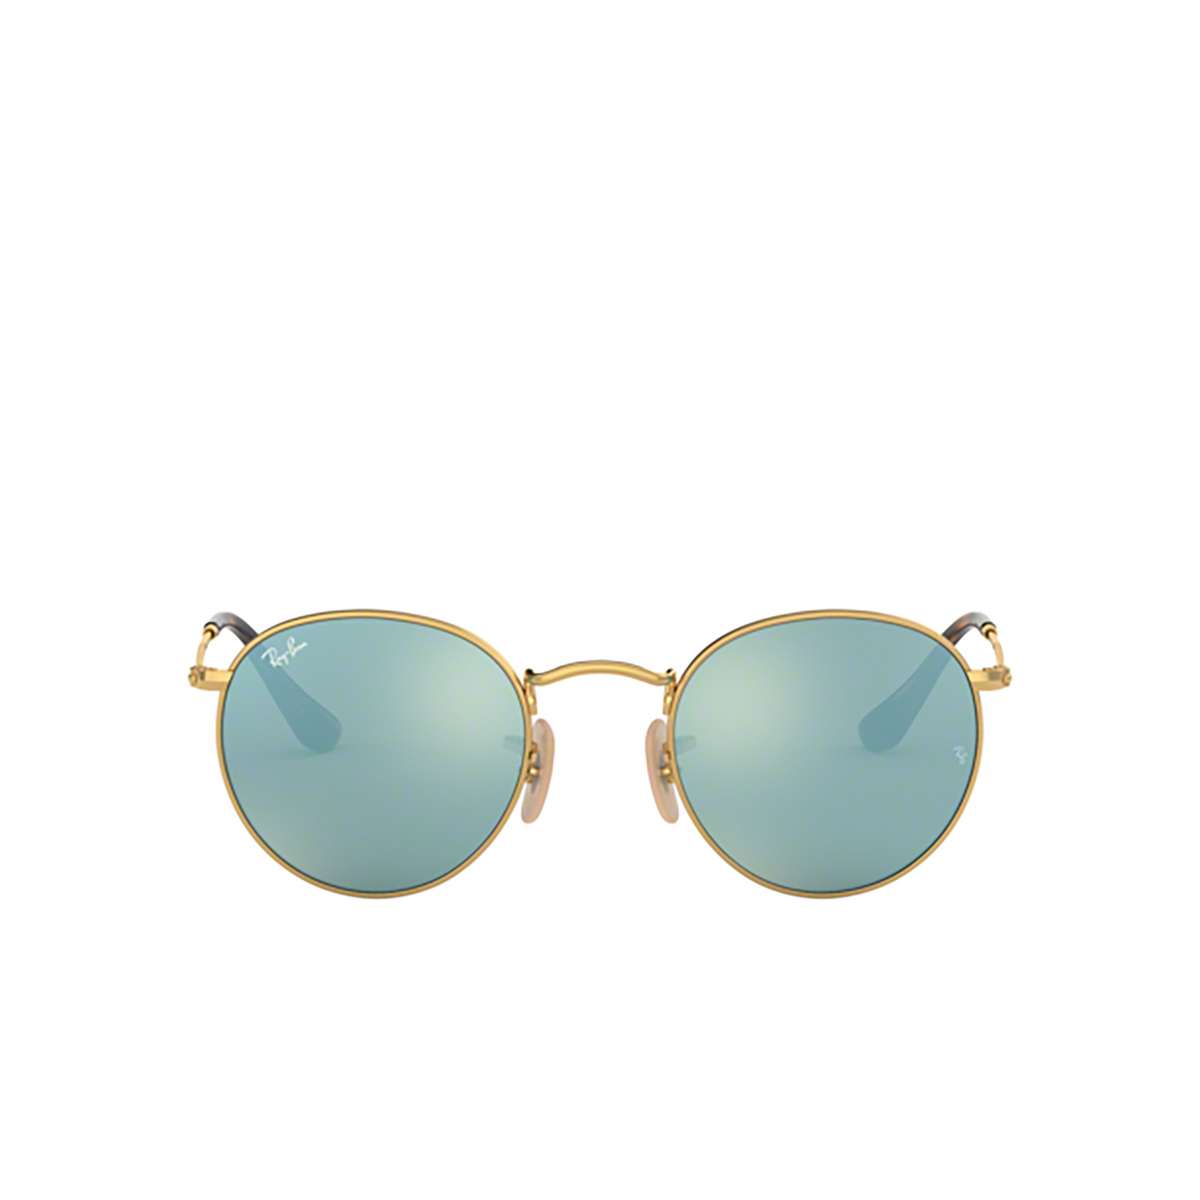 Ray-Ban ROUND METAL Sunglasses 001/30 Arista - front view